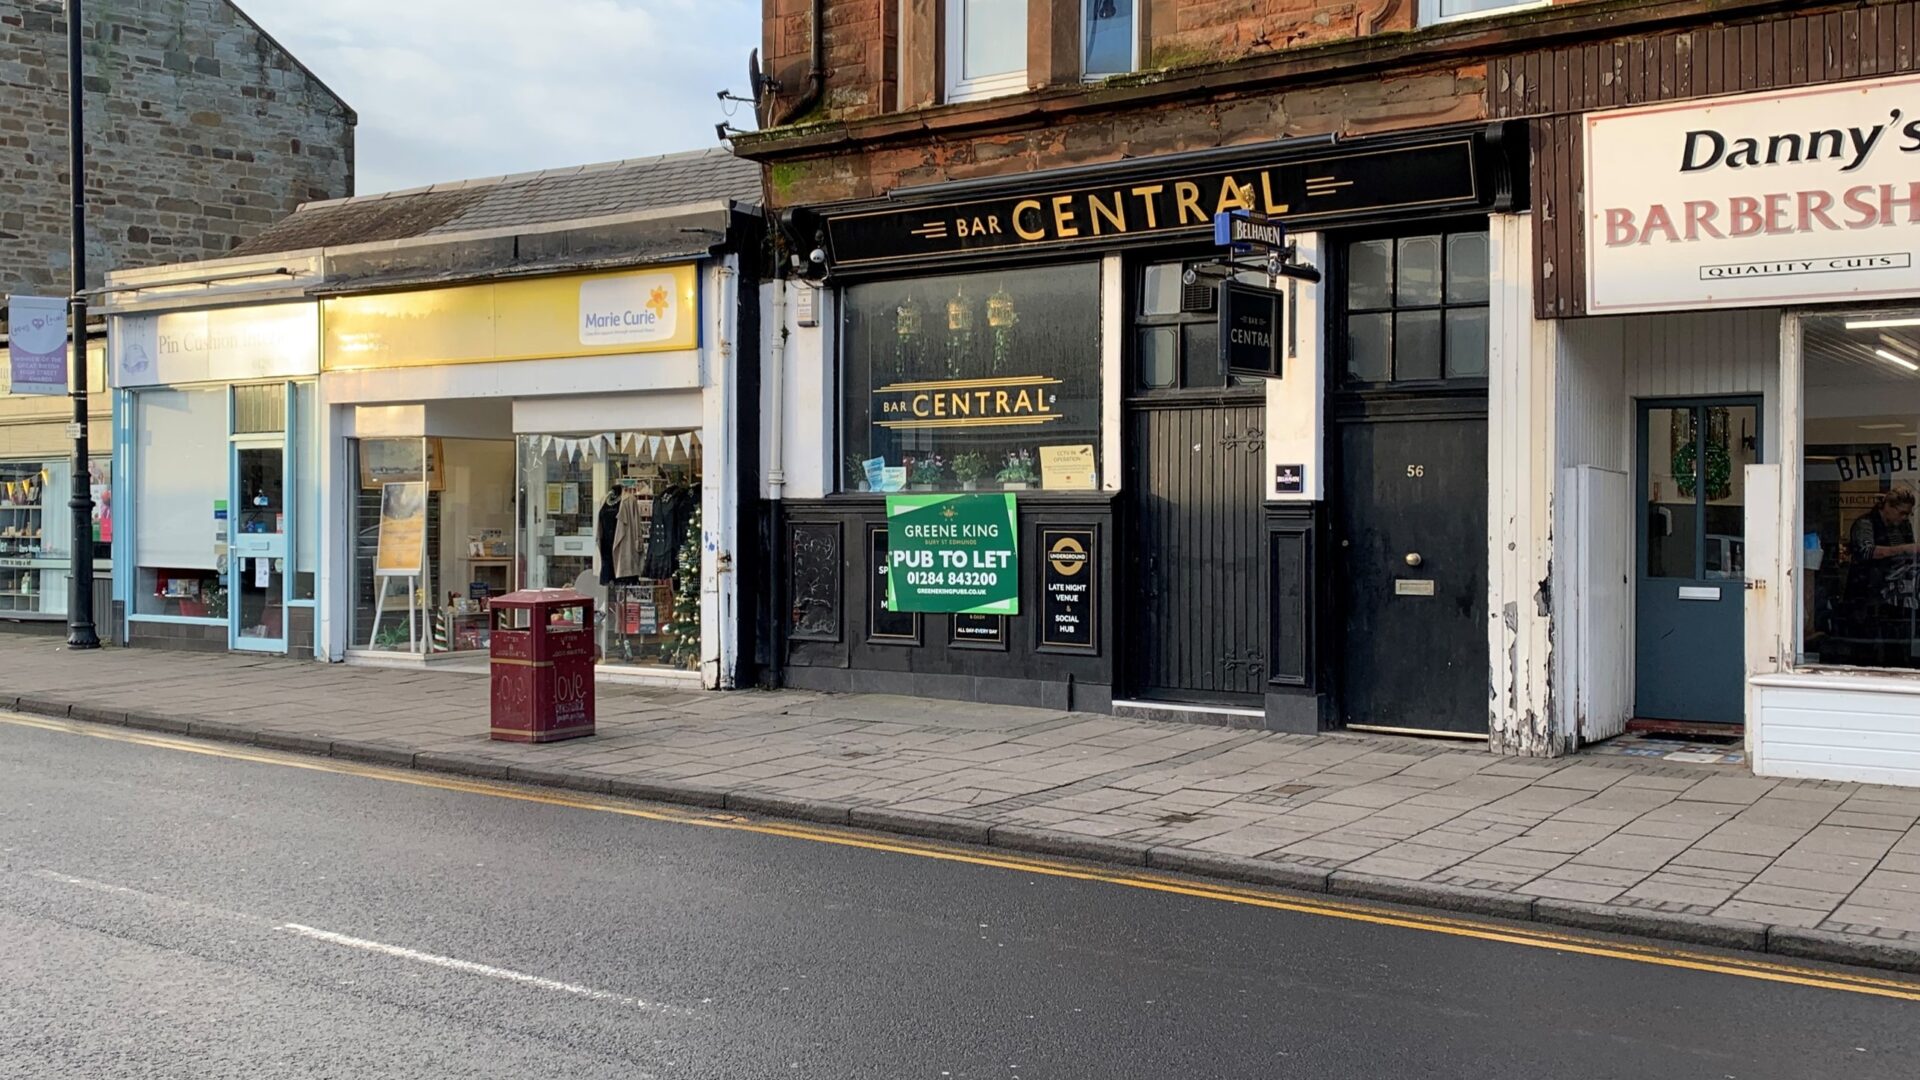 Shepherd brings to market Central Bar in Prestwick for sale or lease